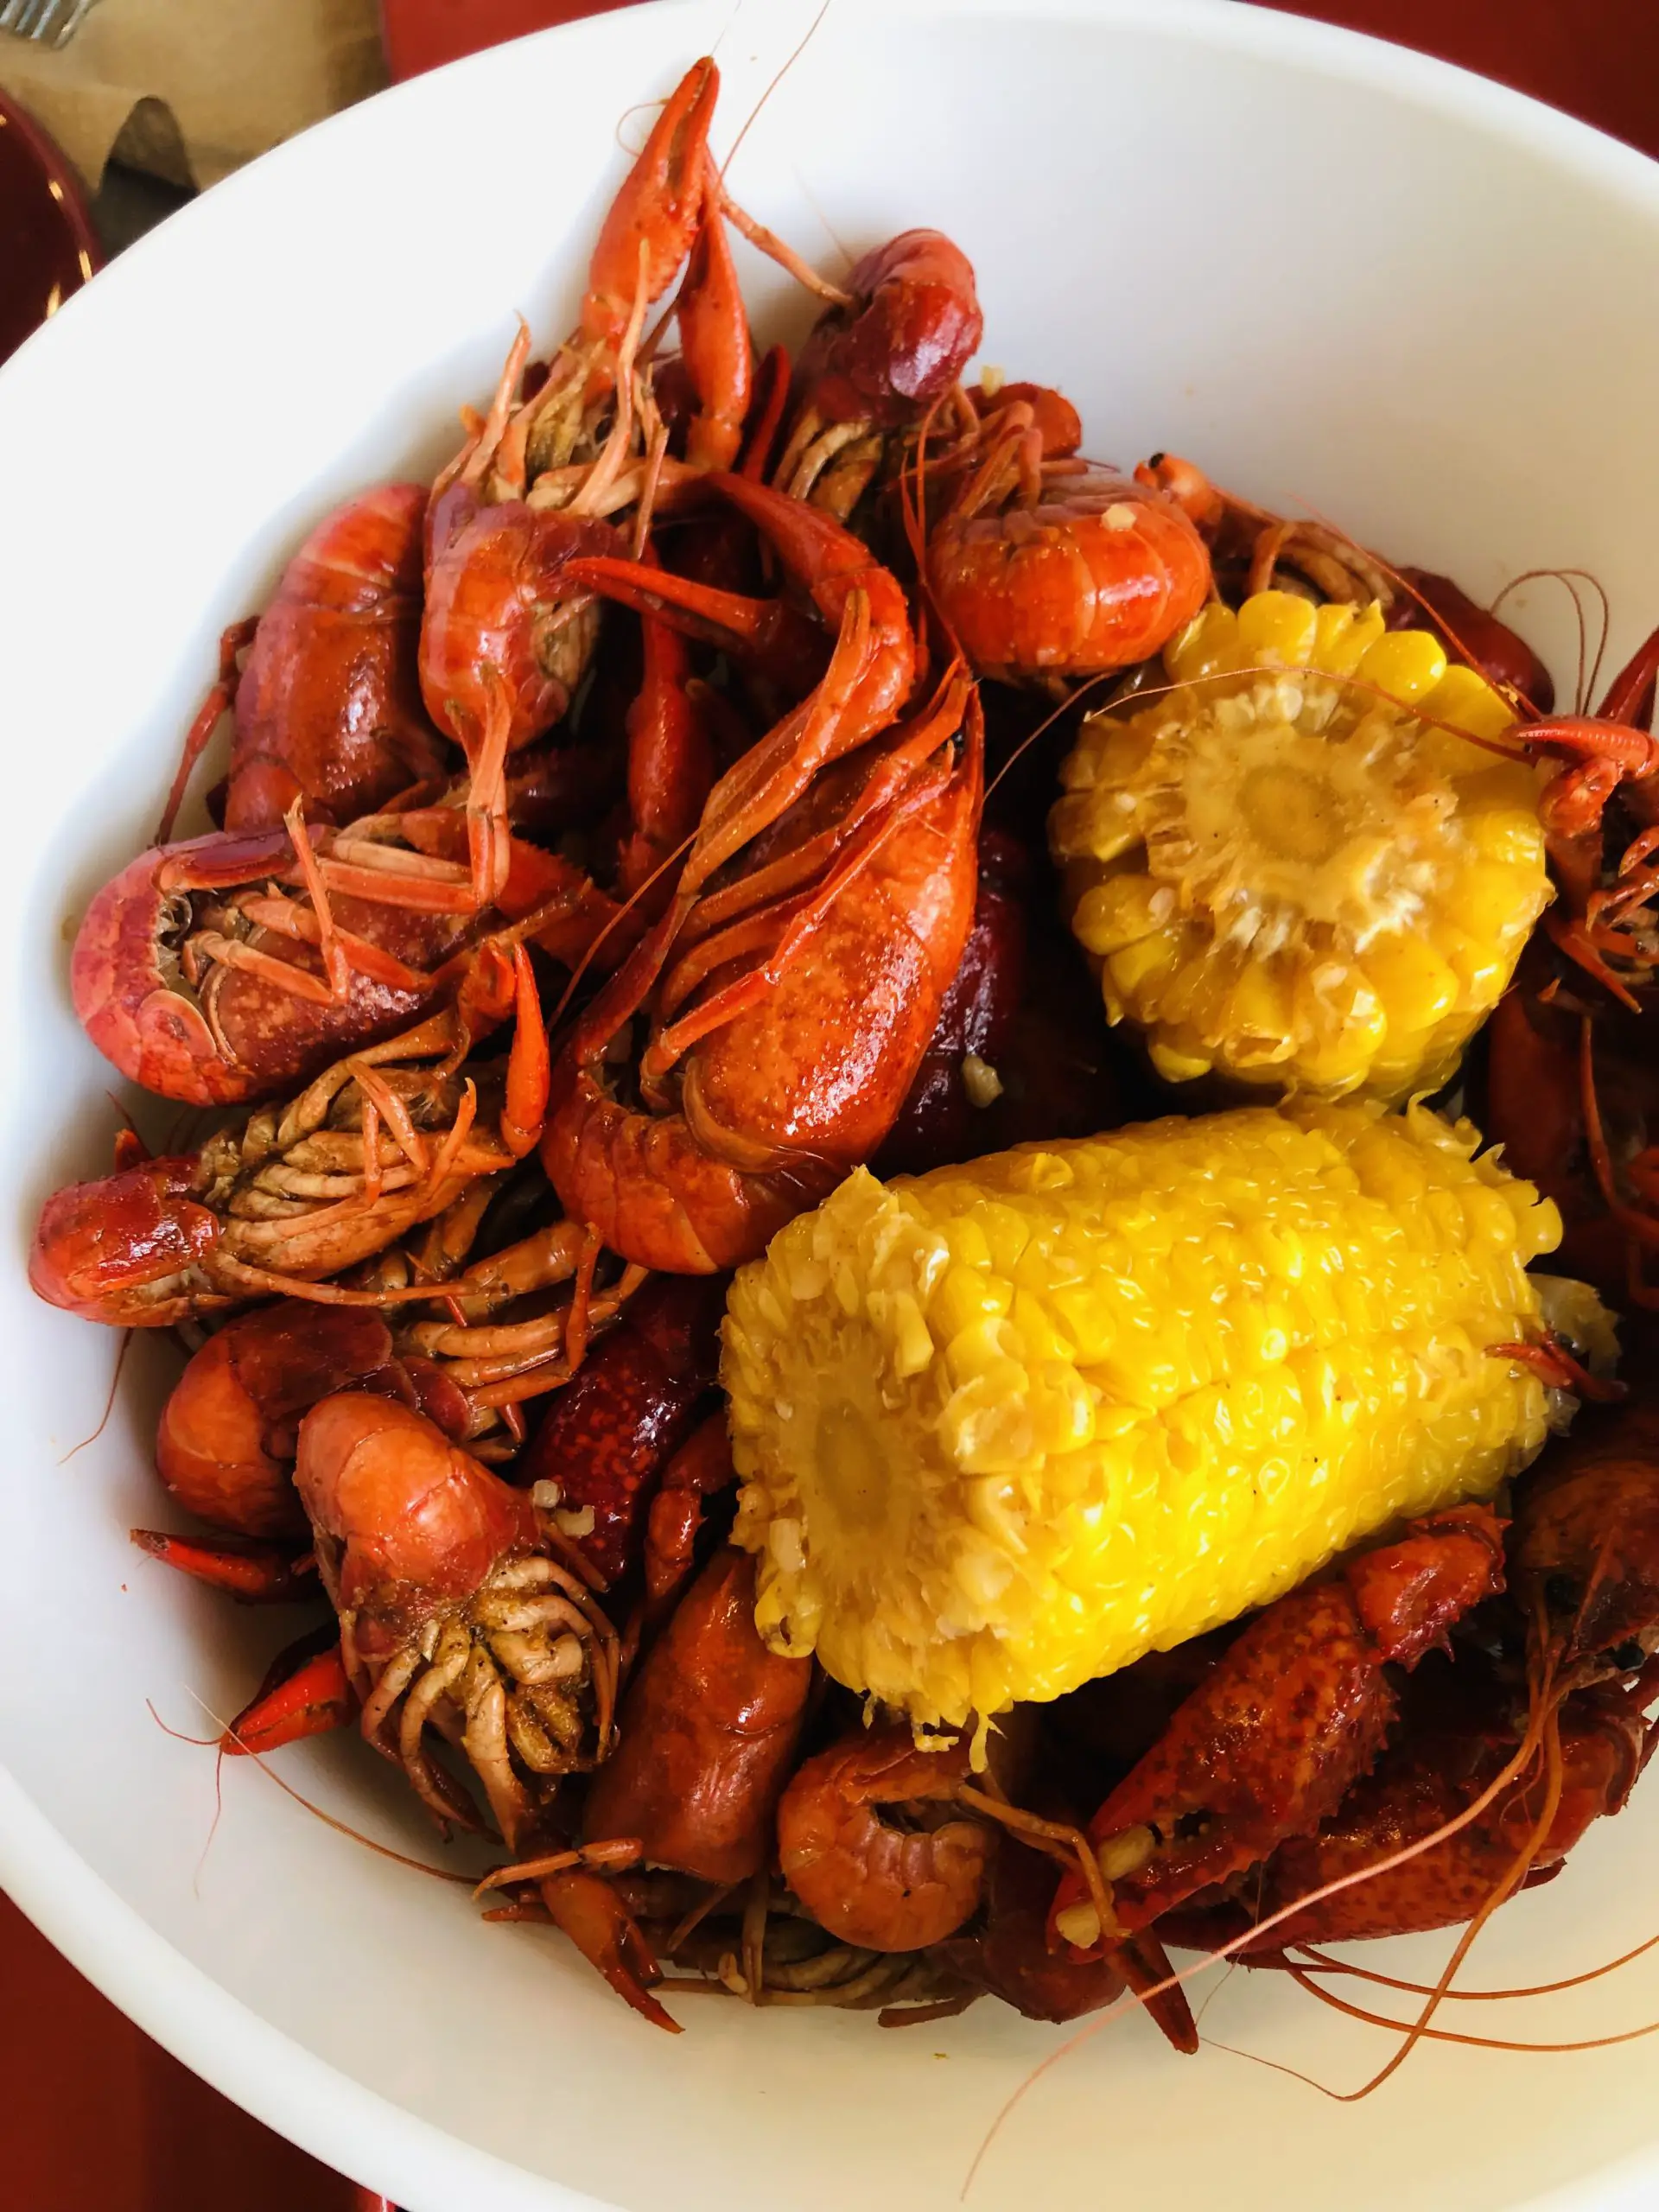 Crawfish and corn on the cob in a white bowl